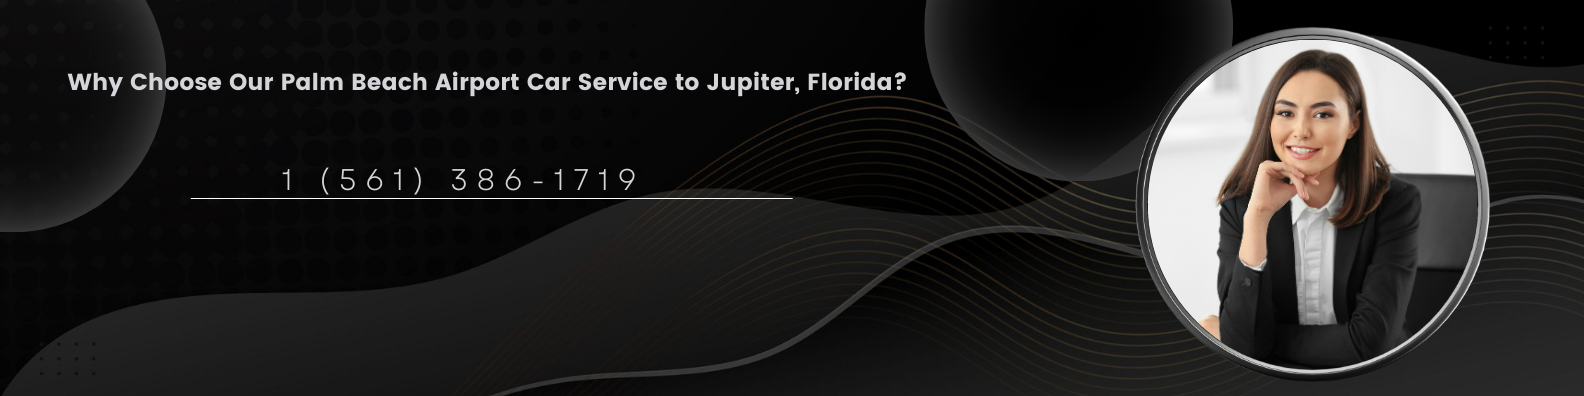 Why Choose Our Palm Beach Airport Car Service to Jupiter, Florida